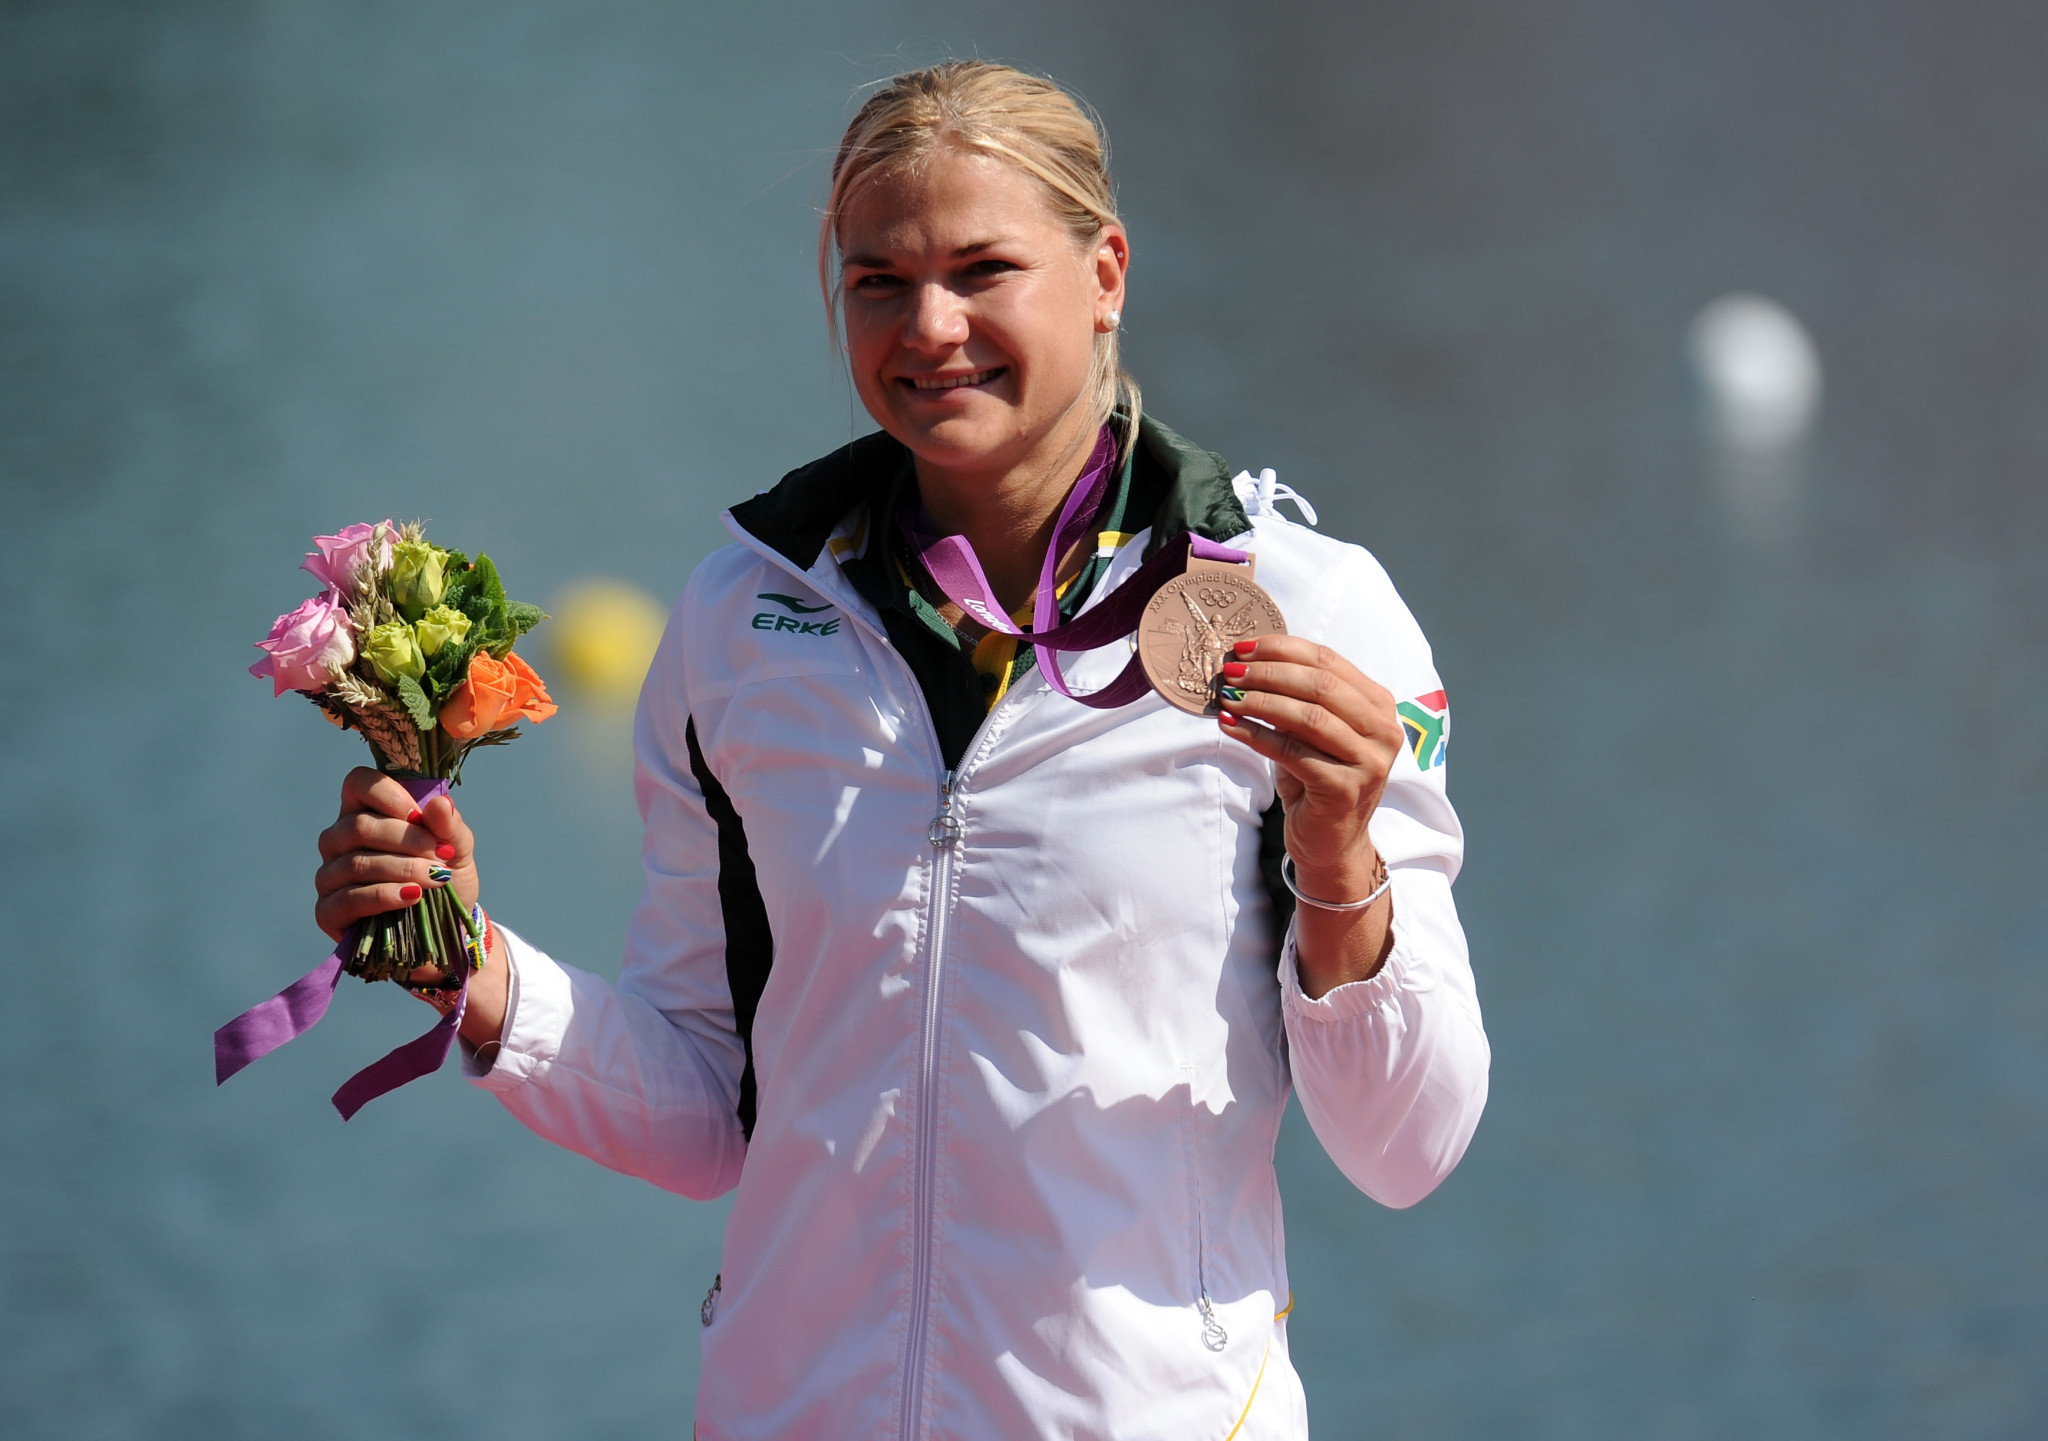 Bridgitte Hartley won an Olympic bronze medal at London 2012 ©Getty Images